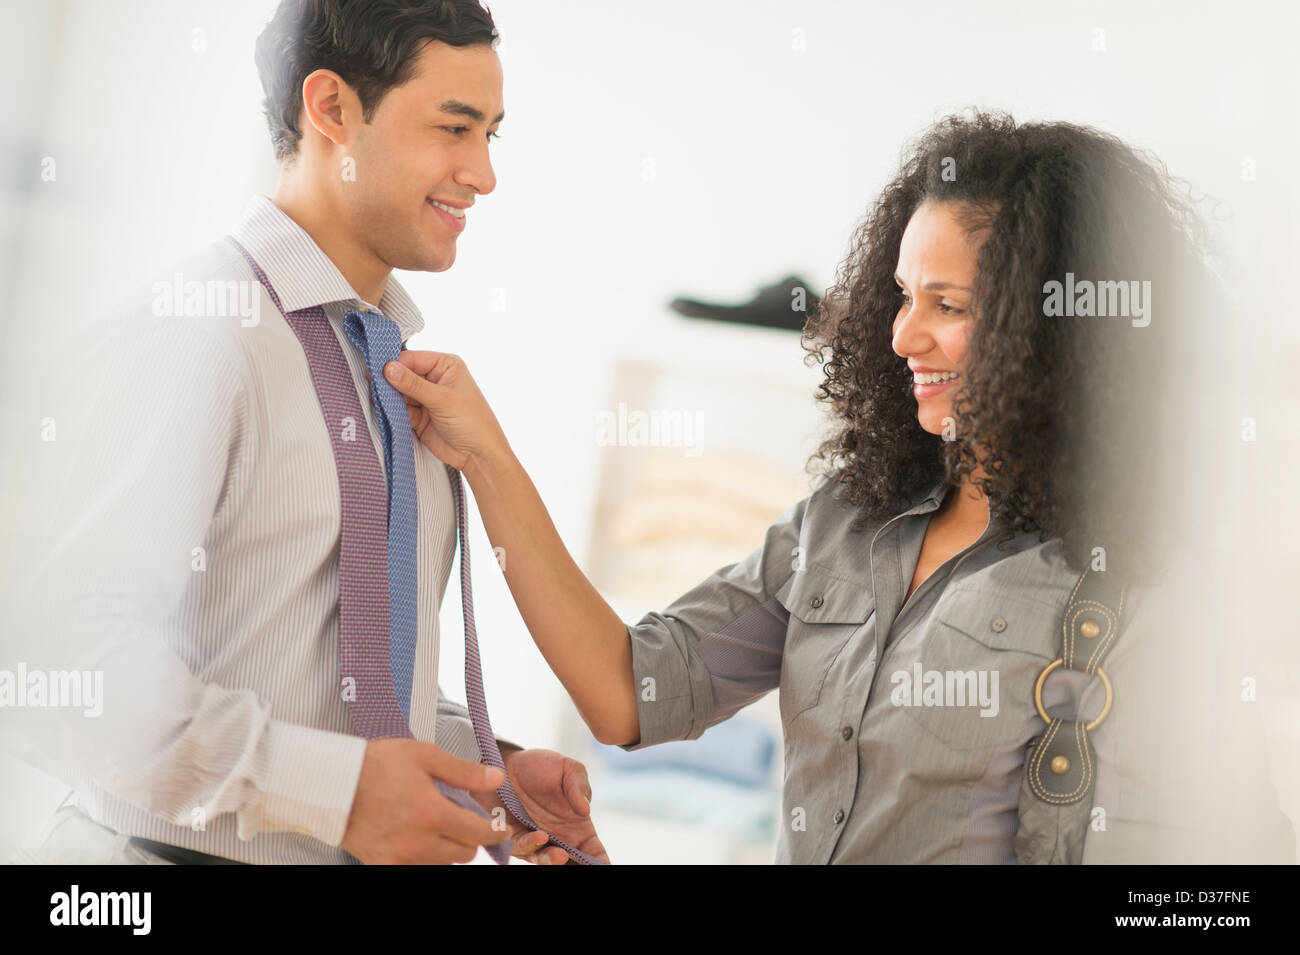 USA, New Jersey, Jersey City, Couple buying tie Stock Photo